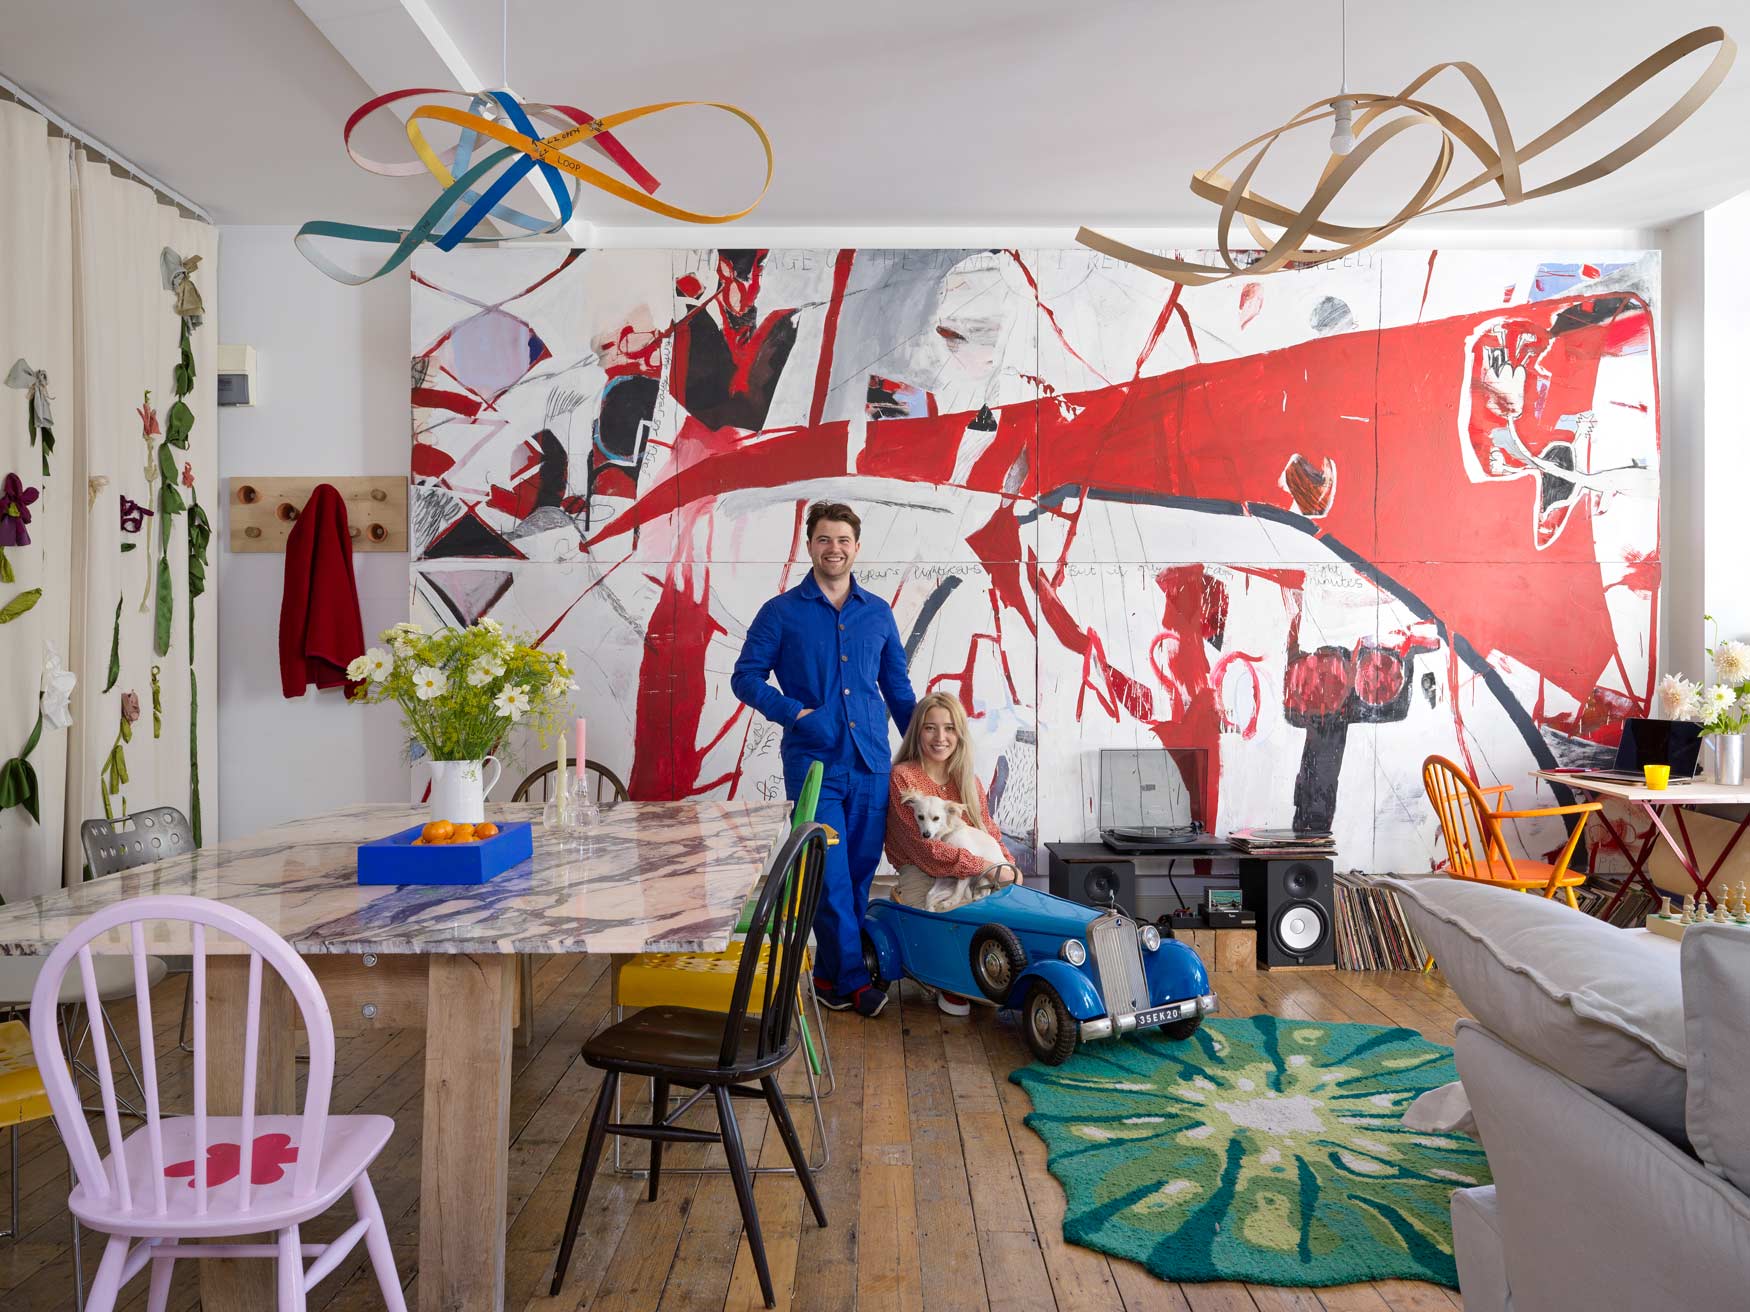 Felix Conran and partner in his flat featured by interior living magazine